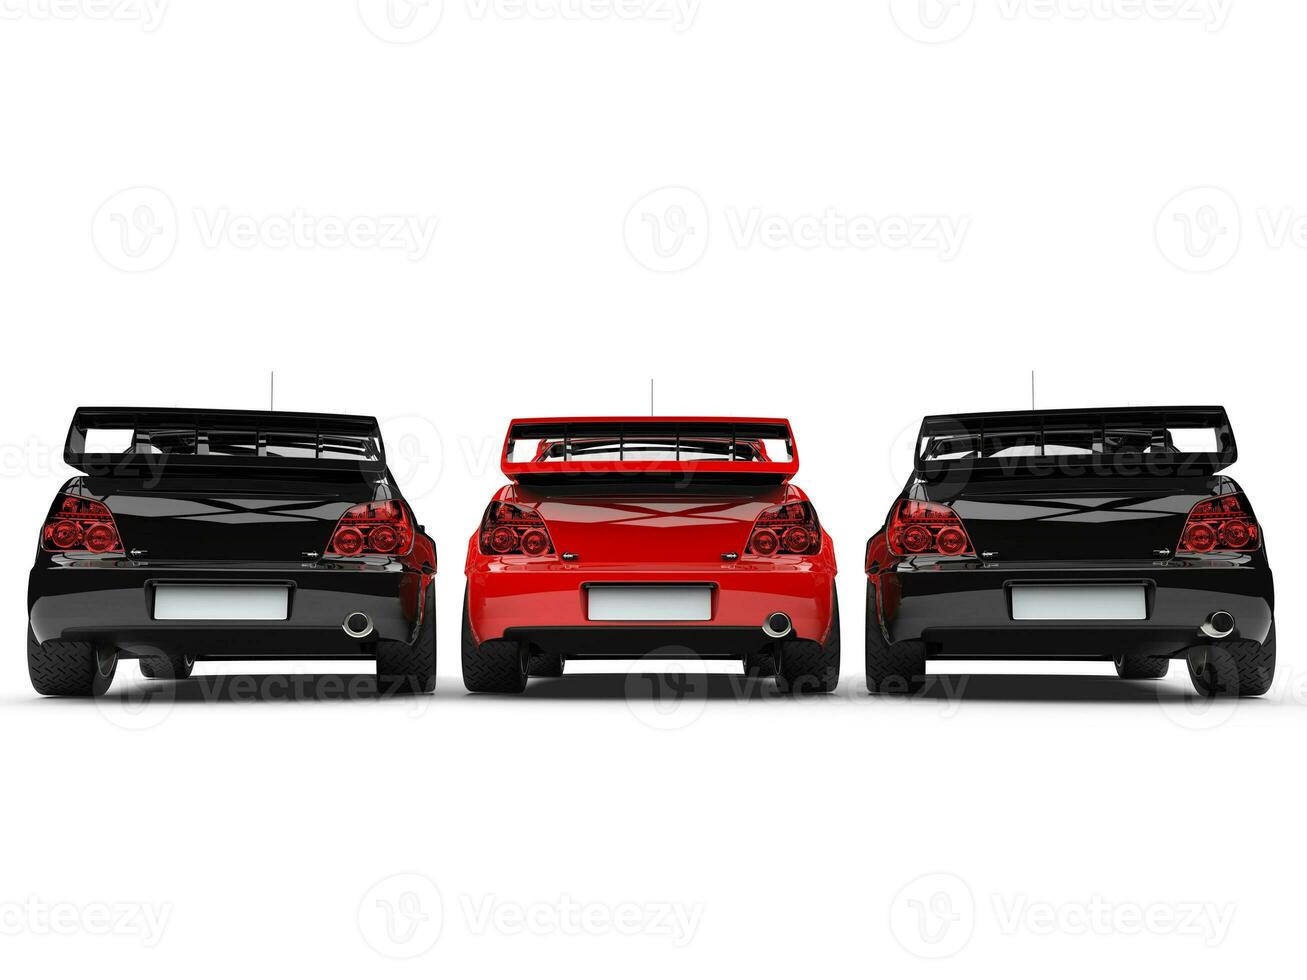 Raging red GT race car in between black race cars - rear view photo